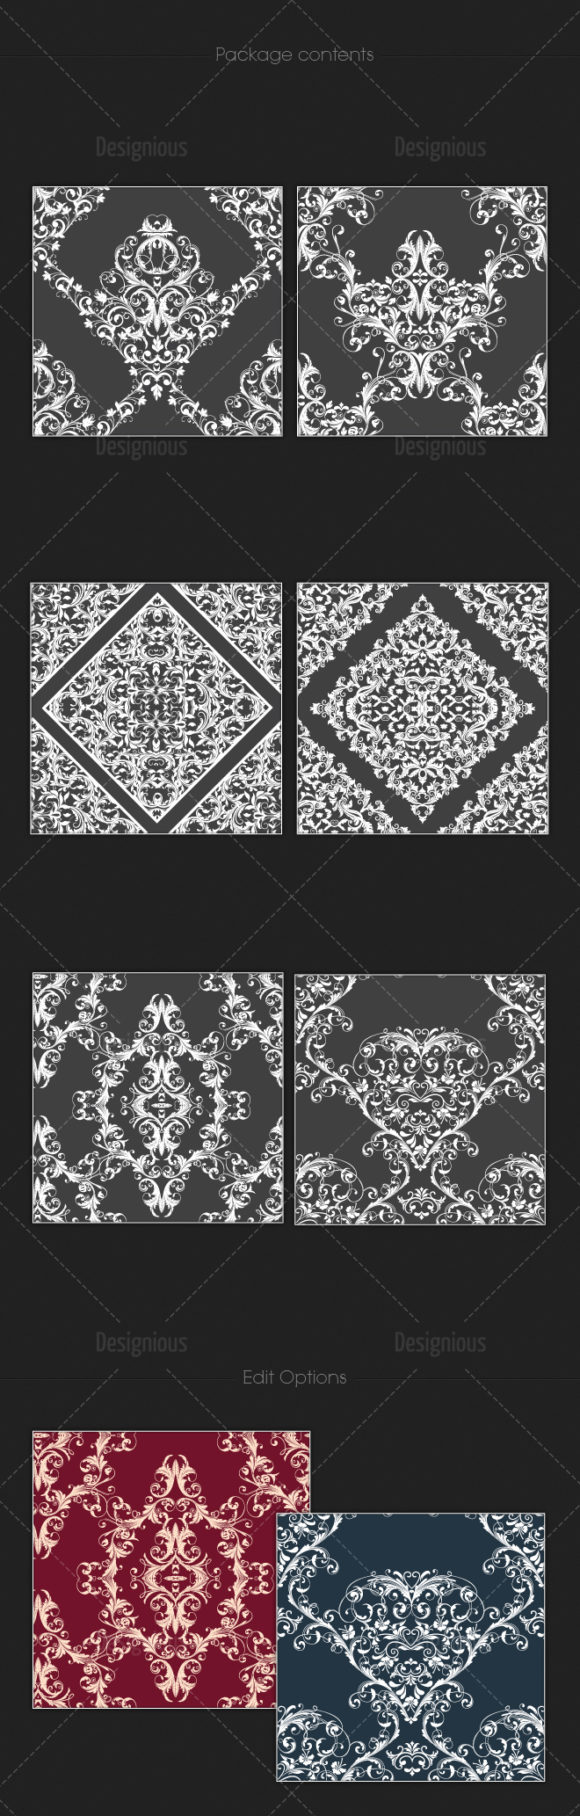 Seamless Patterns Vector Pack 103 2